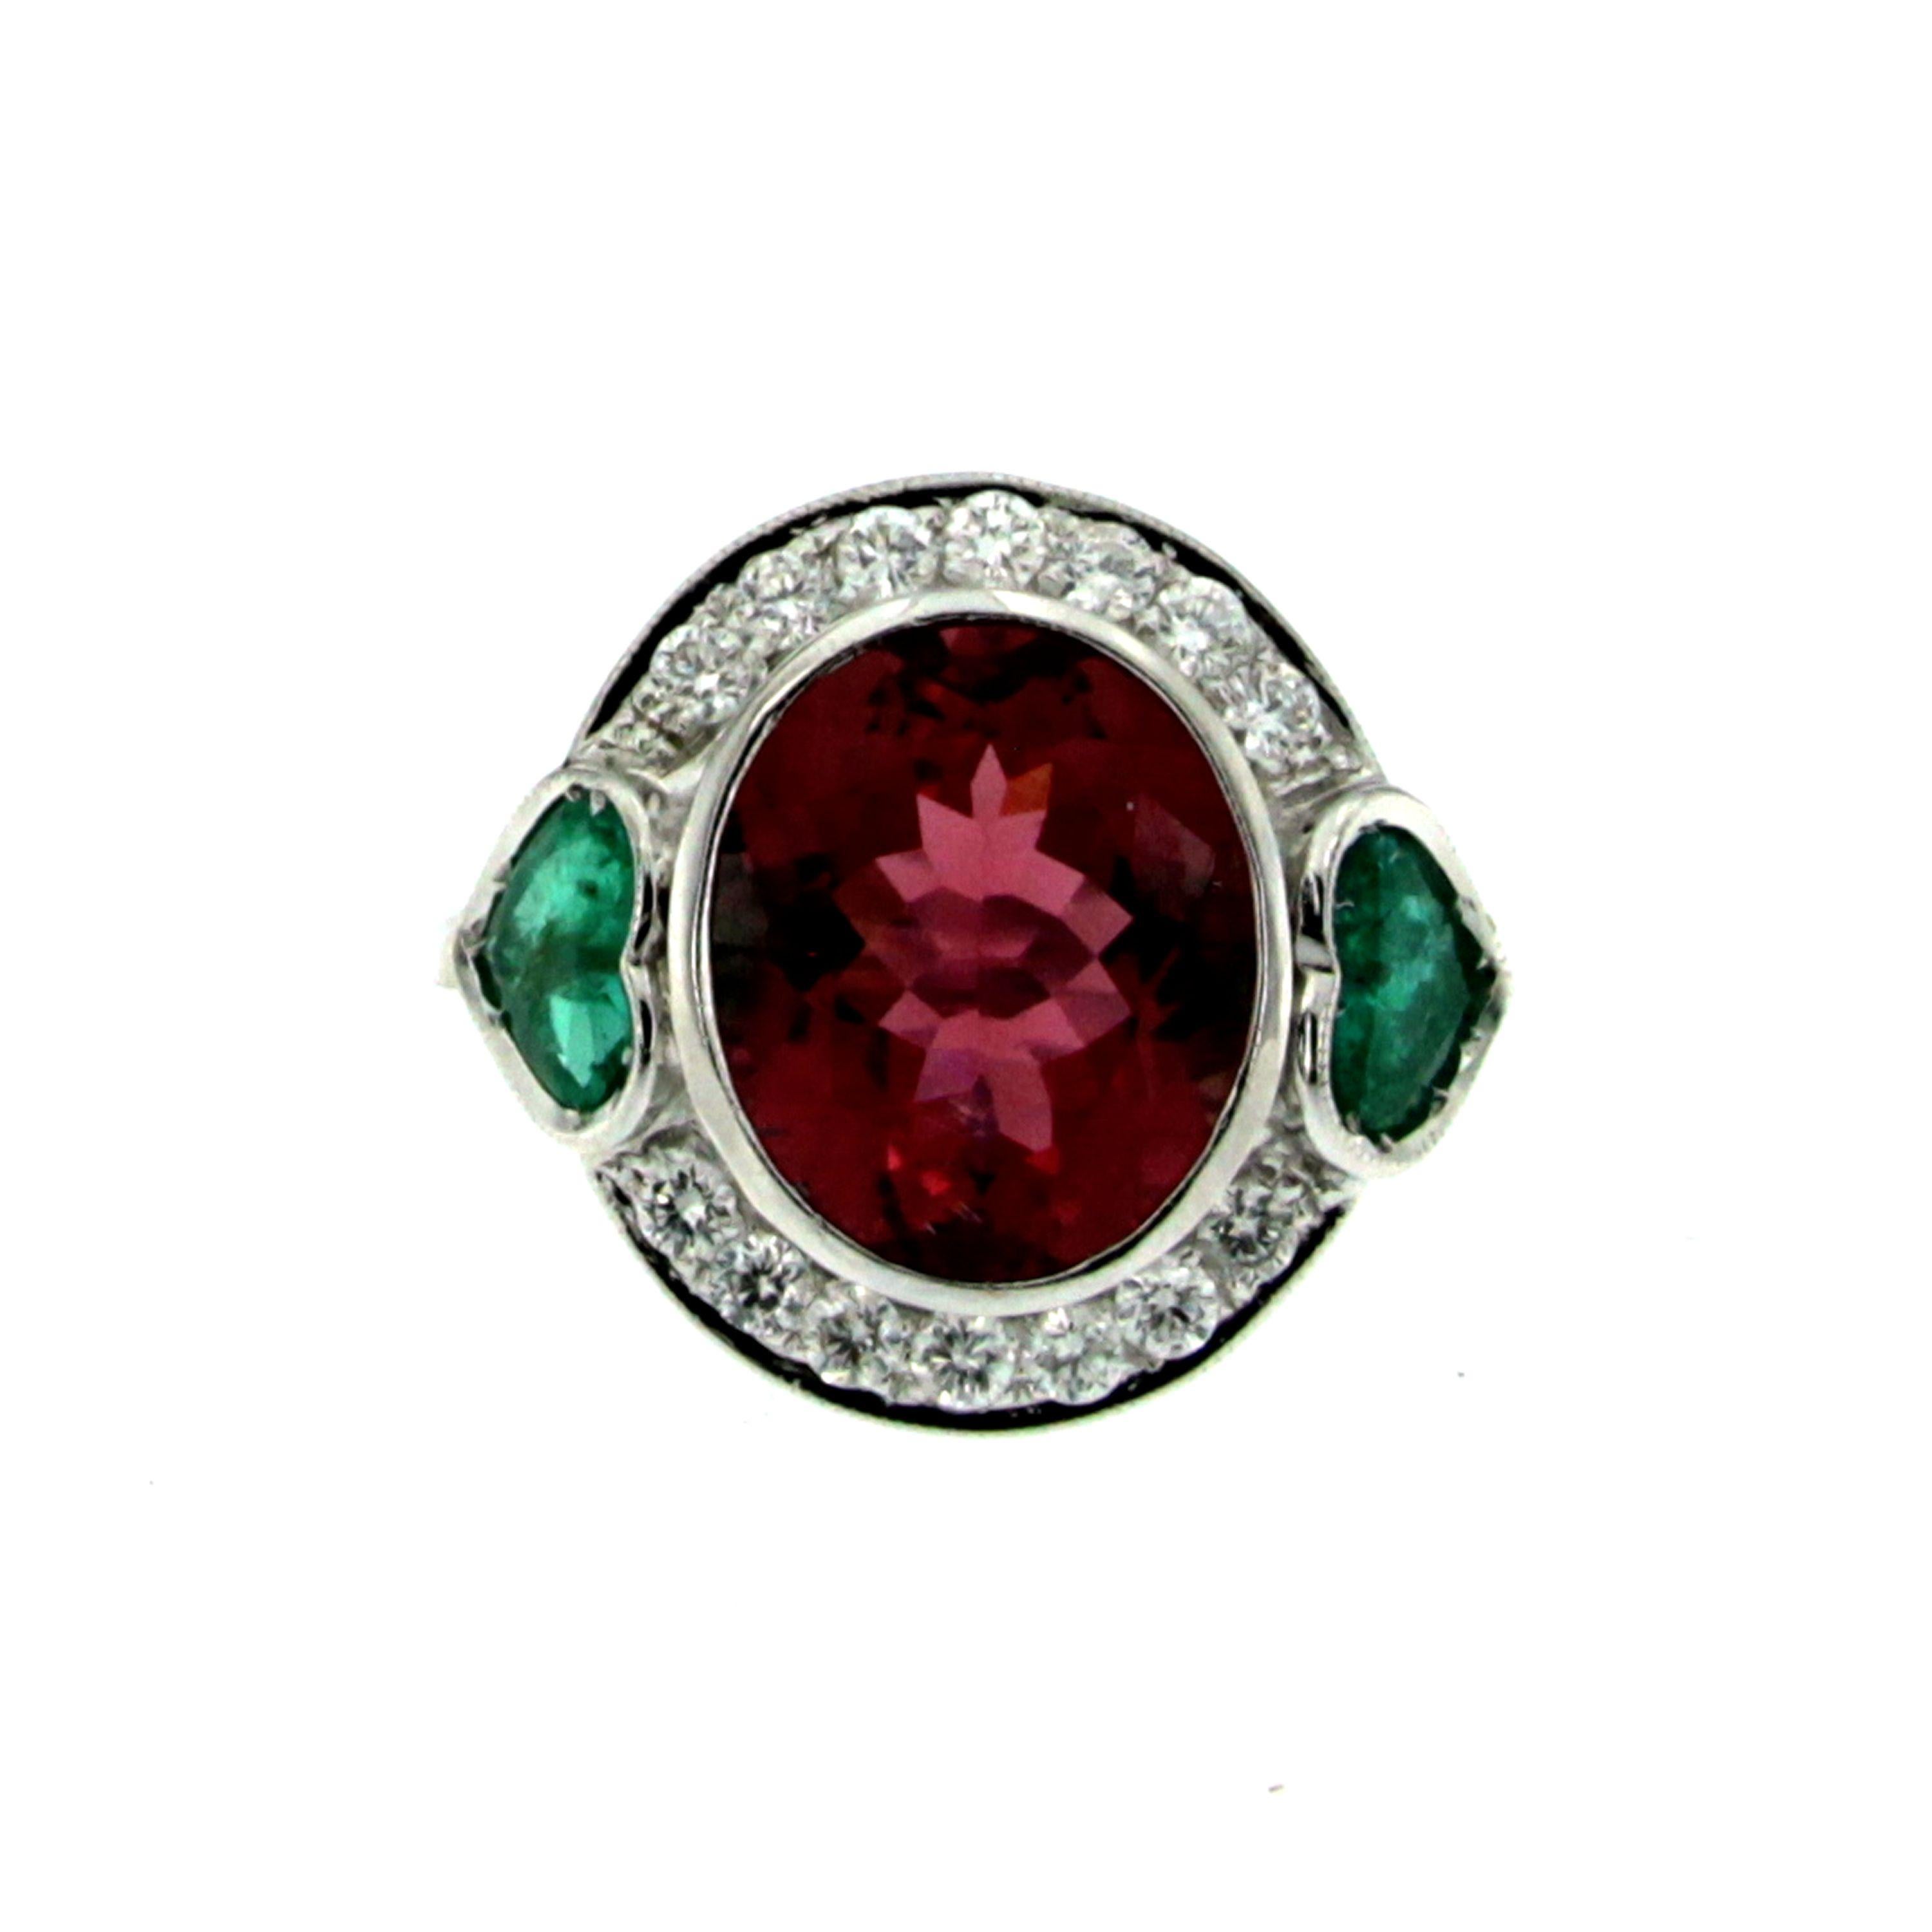 This beautiful and bright cocktail ring is set in the center with one large natural Oval Mixed Cut Rubellite Tourmaline with a vibrant and rich color, weigh 4,80 ct. flanked by two heart cut columbian Emeralds with an approx. total weight of 1 ct